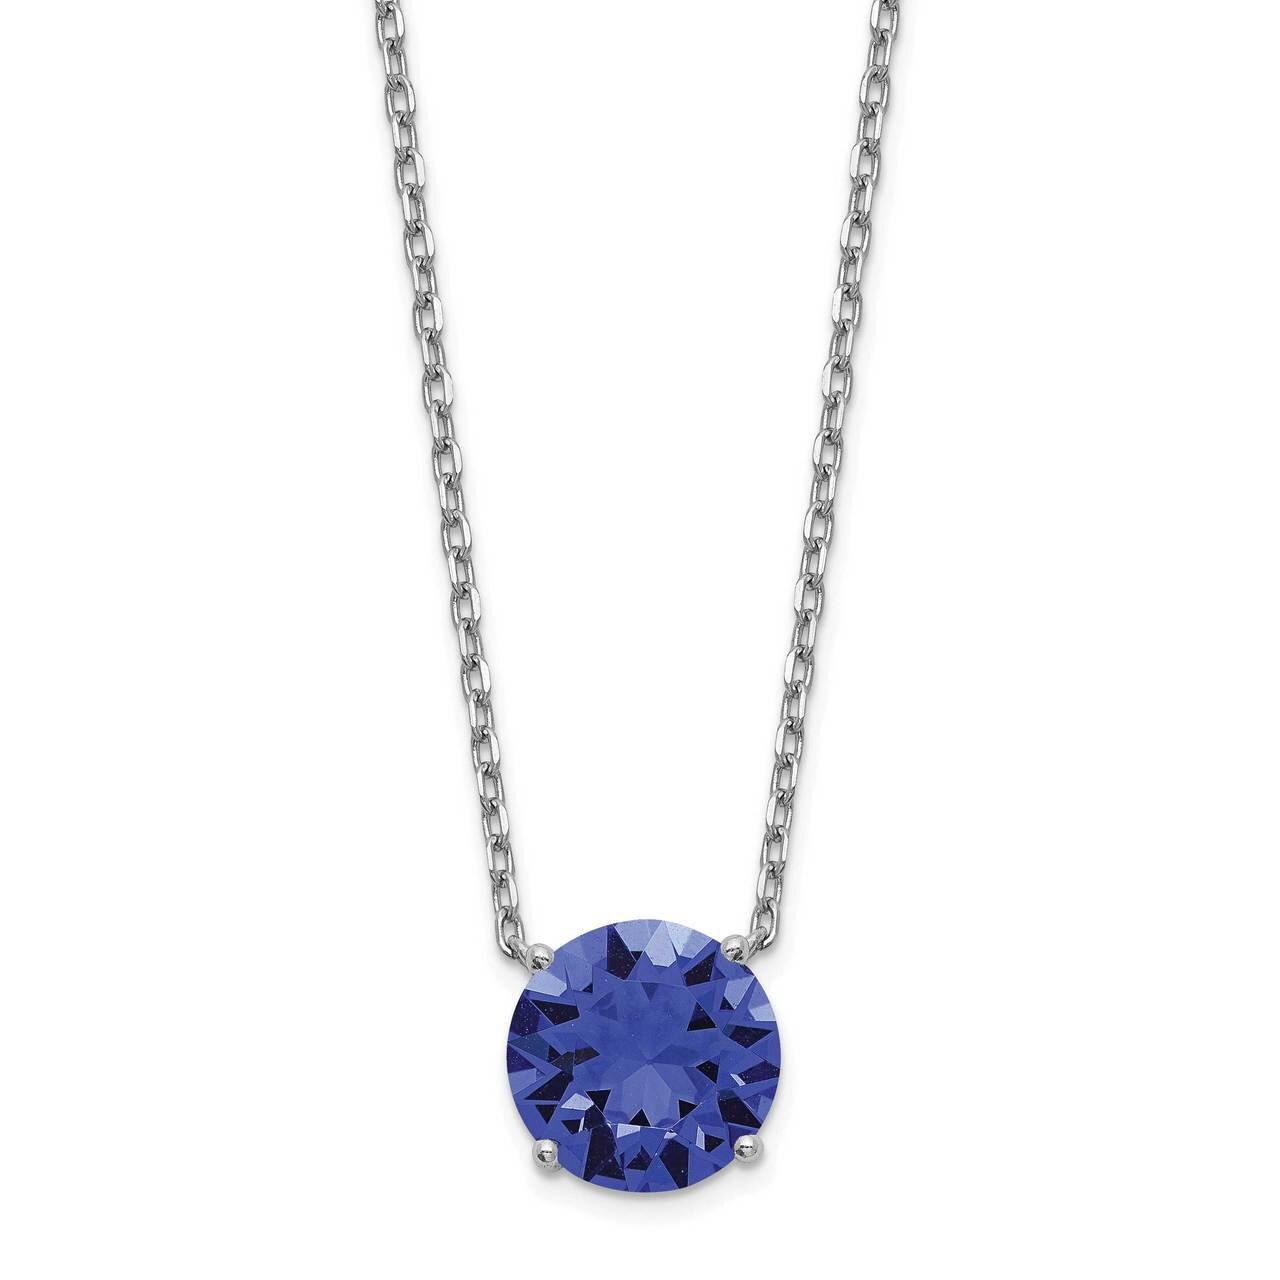 Blue Swarovski Crystal with 2 inch Extender Necklace Sterling Silver Rhodium-plated QG5532-16.5